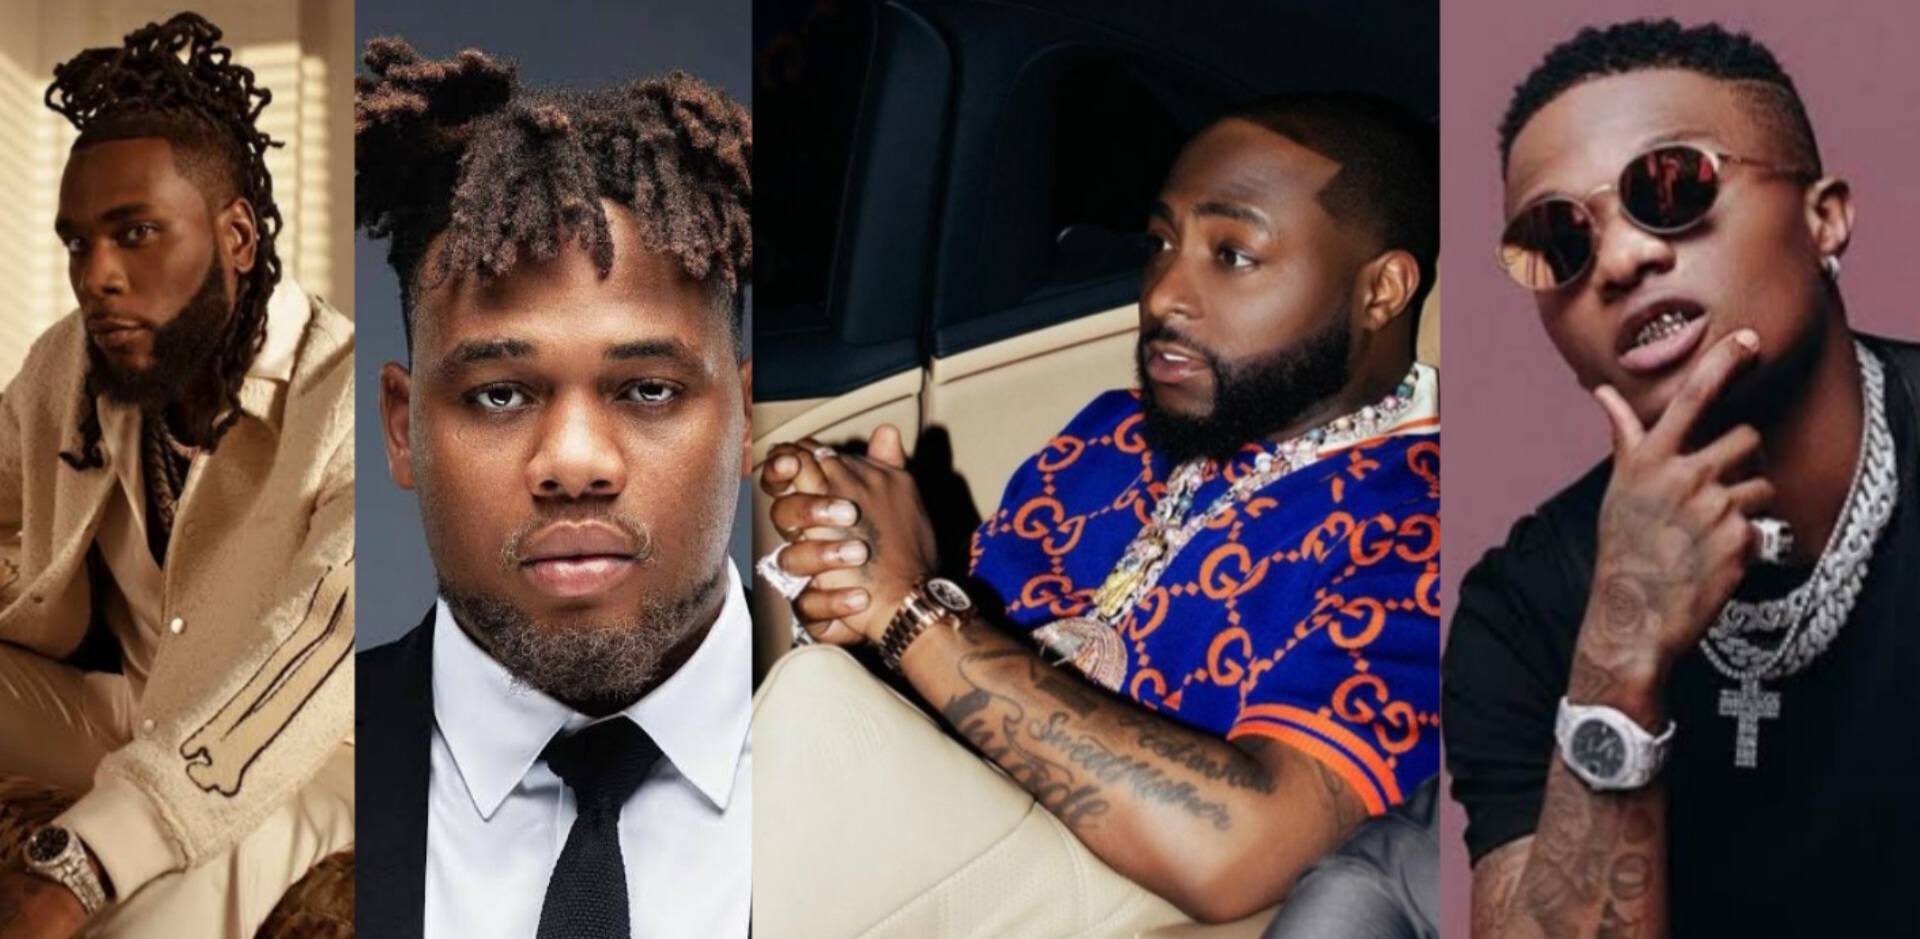 They all come together to discredit me … but” – Davido Sends Strong Warning to BNXN, Burna Boy, Wizkid, and Others in Latest Post